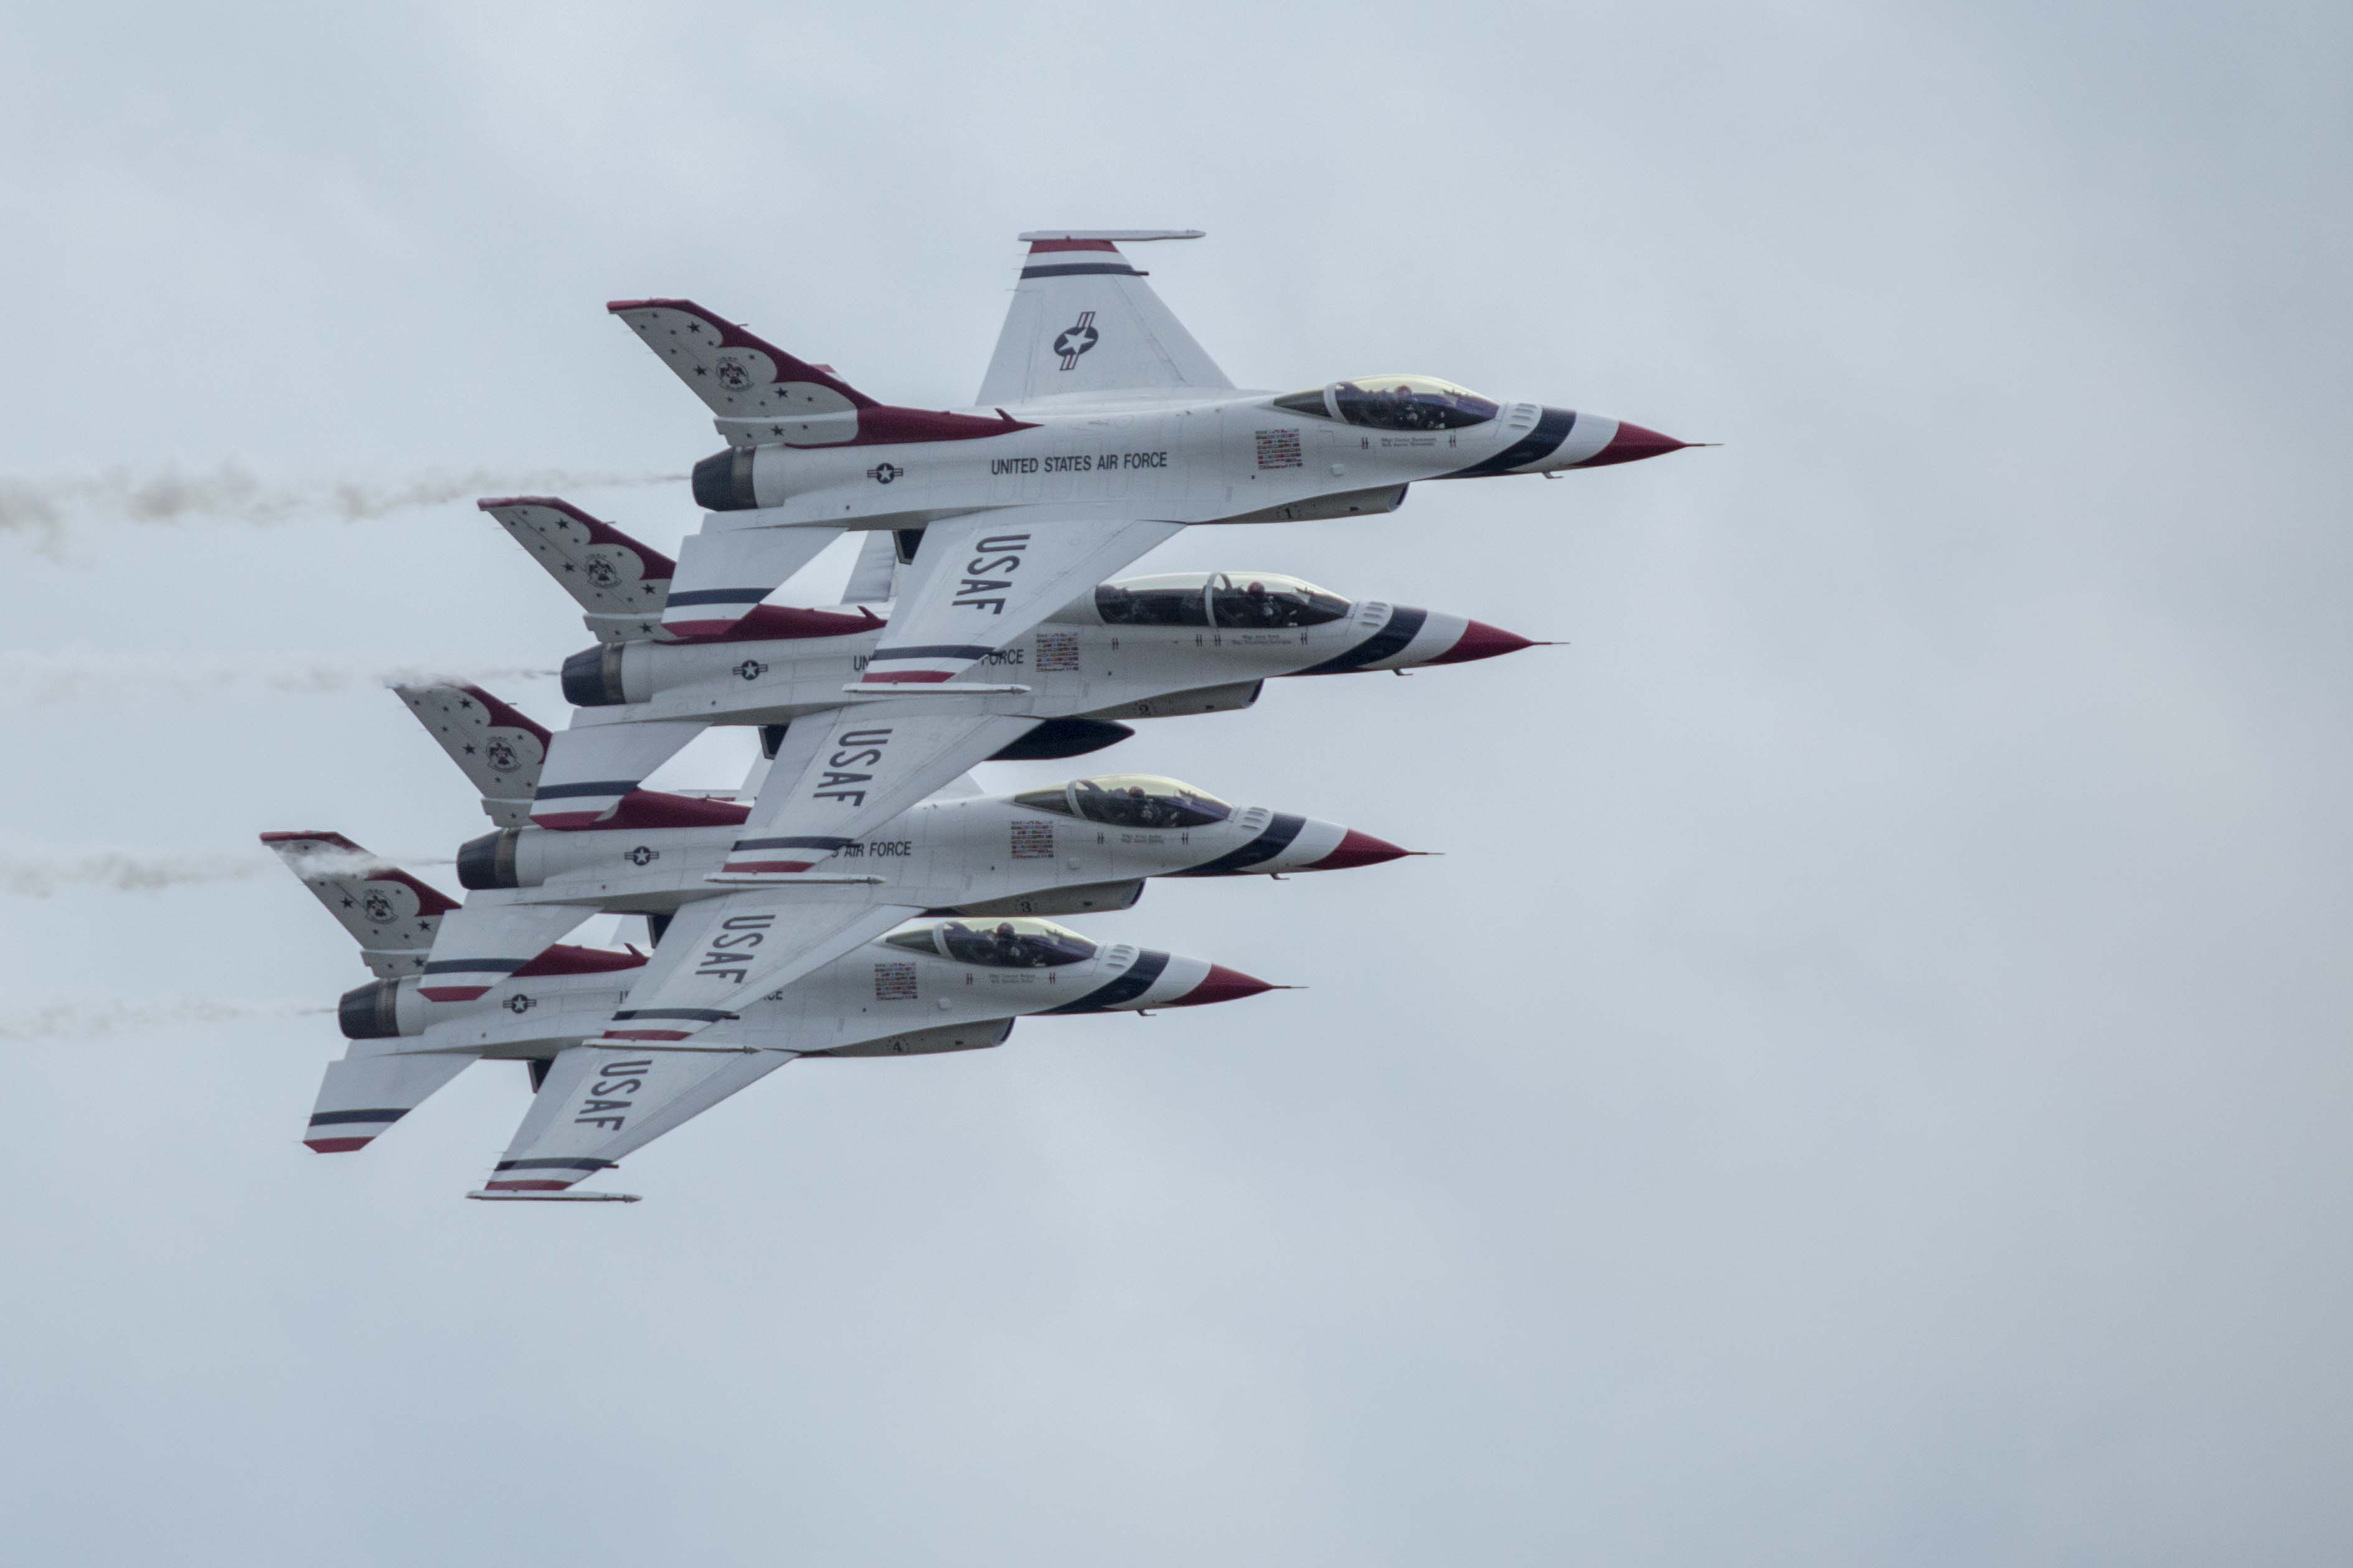 Air Show comes to JBSALackland Kelly Field > Joint Base San Antonio > News